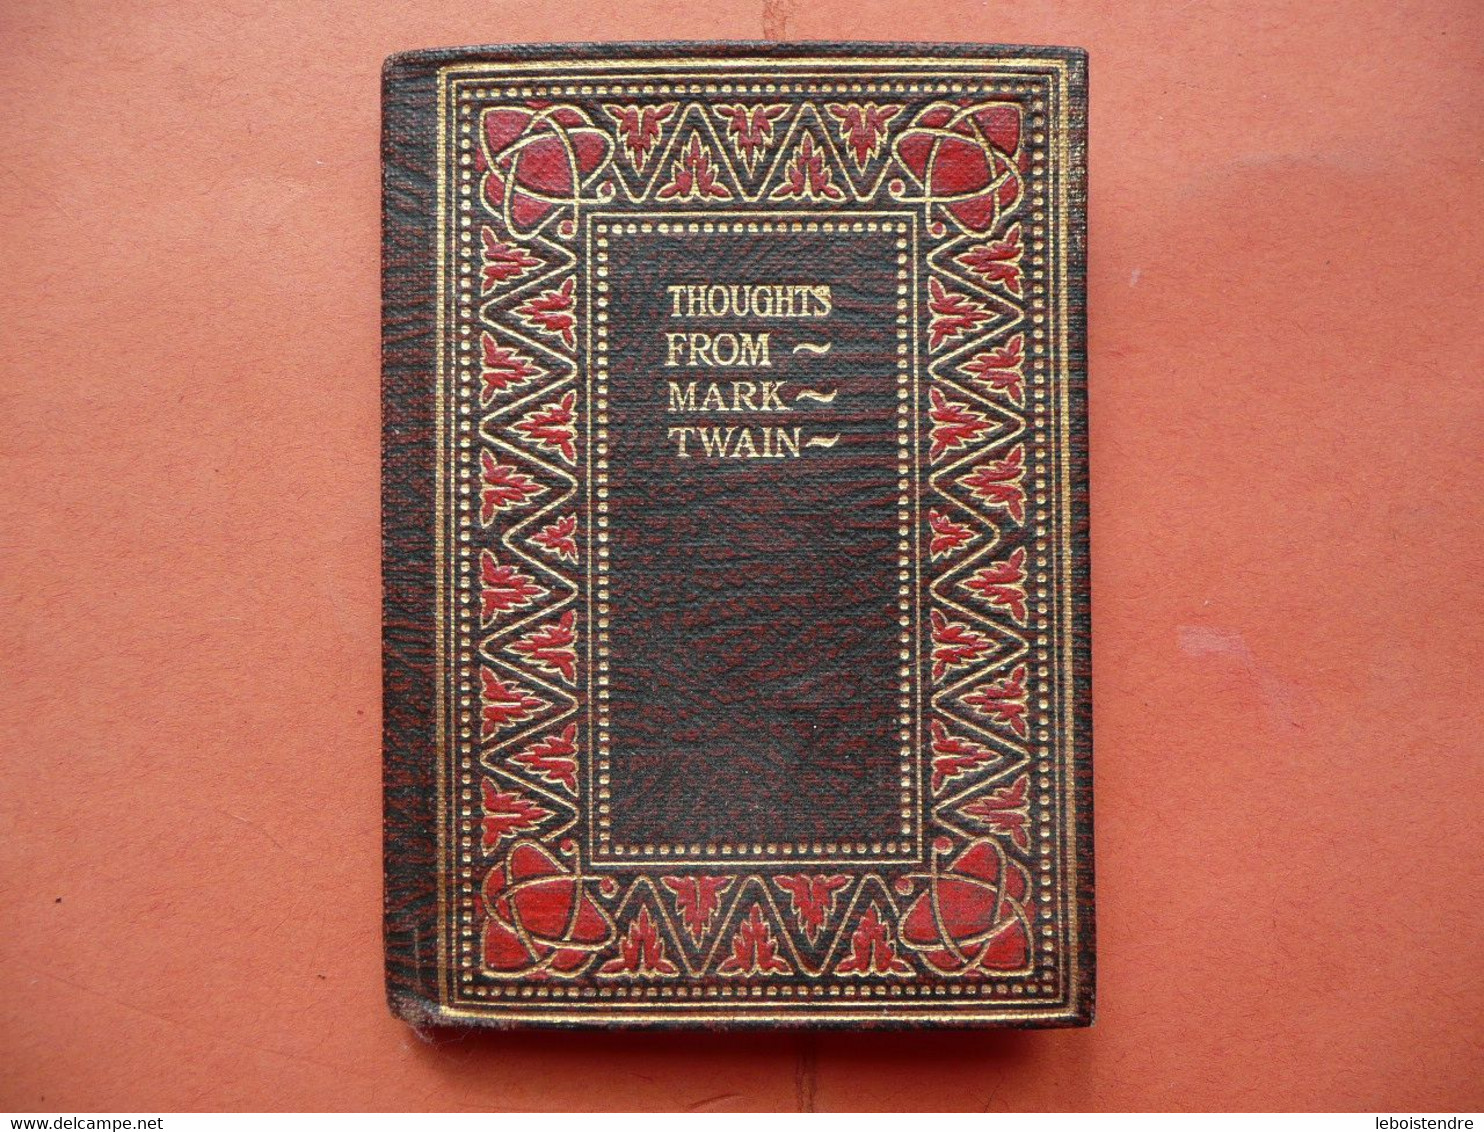 THOUGHTS FROM MARK TWAIN SELECTED BY ELSIE E. MORTON SESAME BOOKLETS MINIATURE - Literary